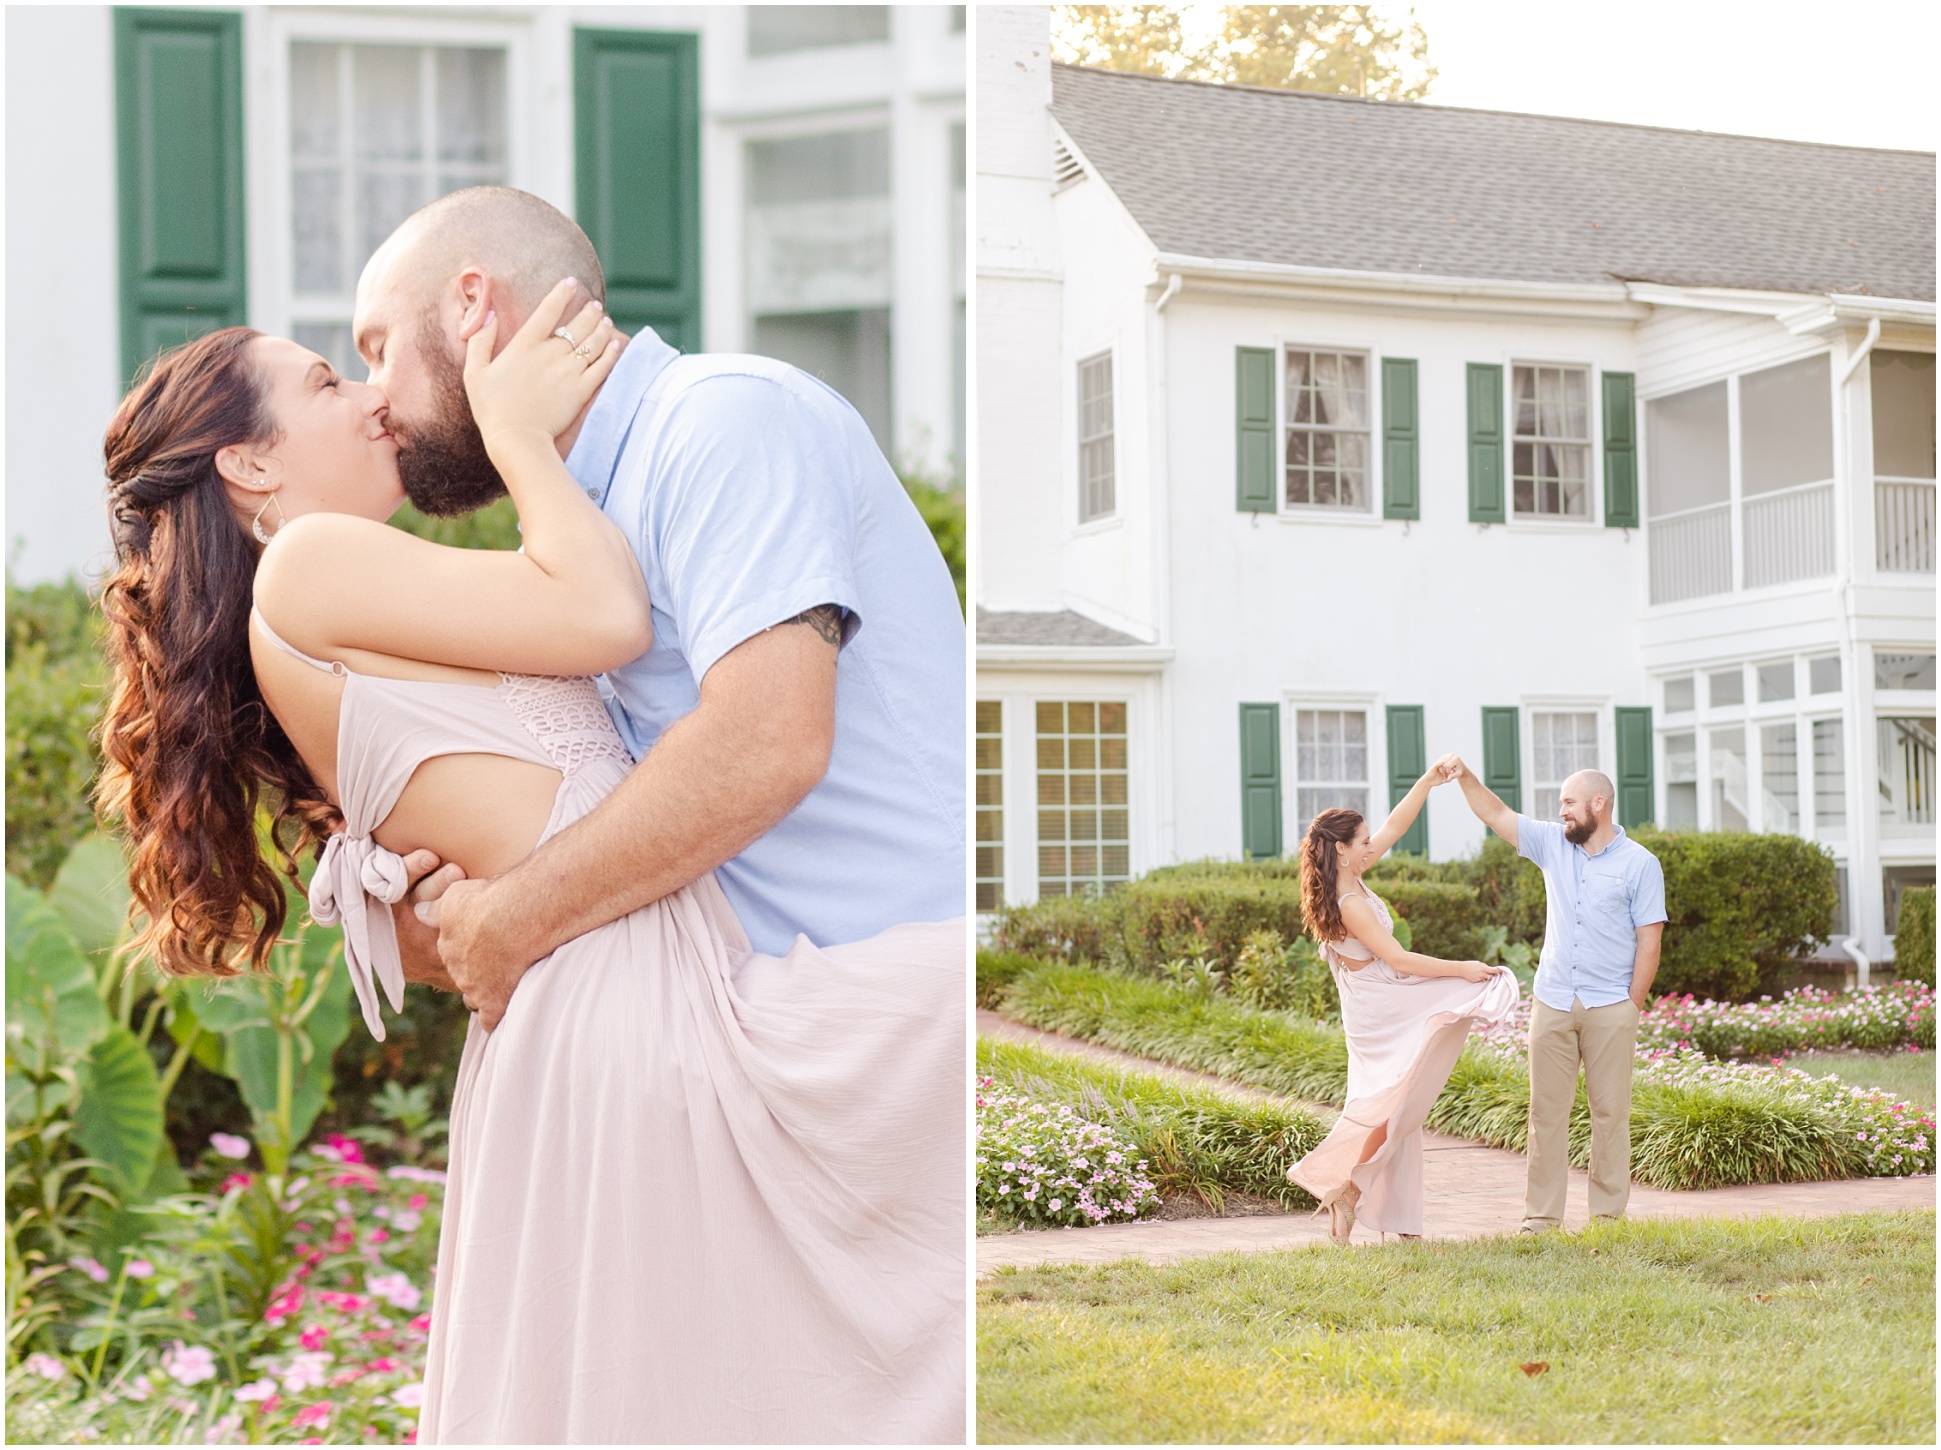 boyfriend in blue shirt dipping and kissing girlfriend in blush dress; boyfriend twirling girlfriend 